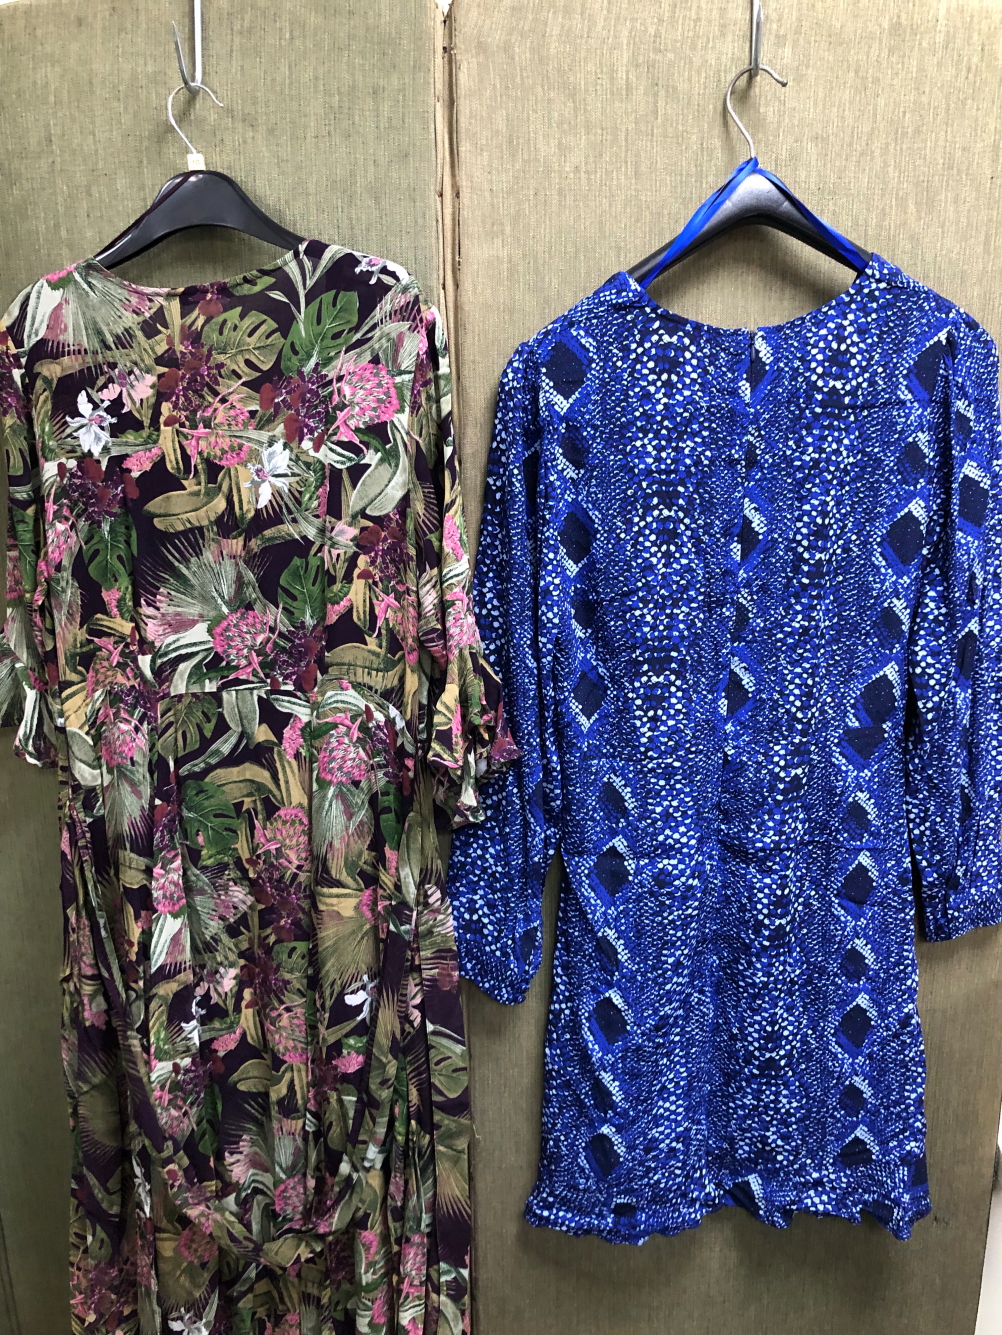 TWO M&S DRESSES, ONE GREEN FLORAL PRINT WITH CAMI UNDER DRESS SIZE UK 12, AND A SHORTER BLUE - Image 10 of 10